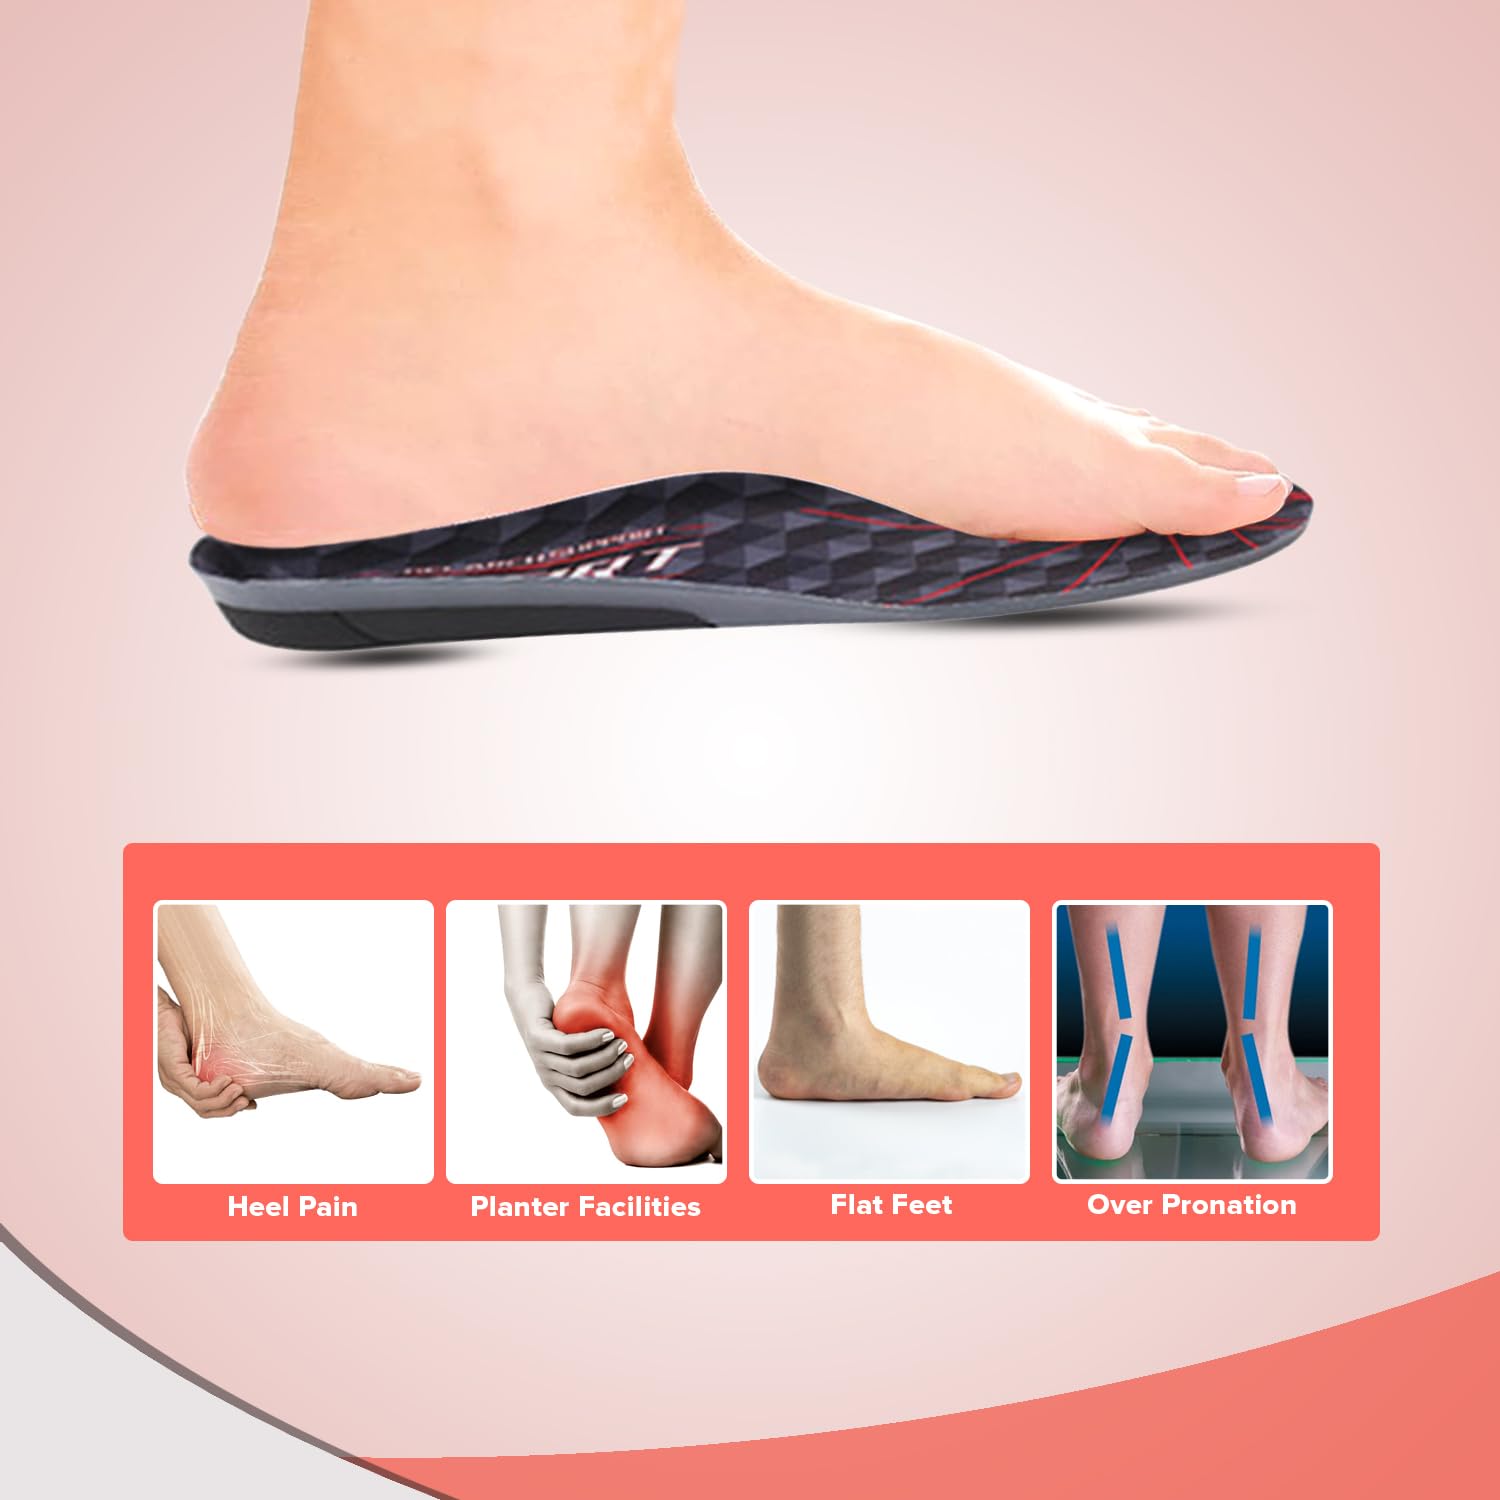 Dr Foot Orthotics for Sore Soles Insoles |For Comfortable Walking And Pressure Relief | Comfort and Support for Aching Feet |All Day Comfort | For Men & Women - 1 Pair- (Medium Size)